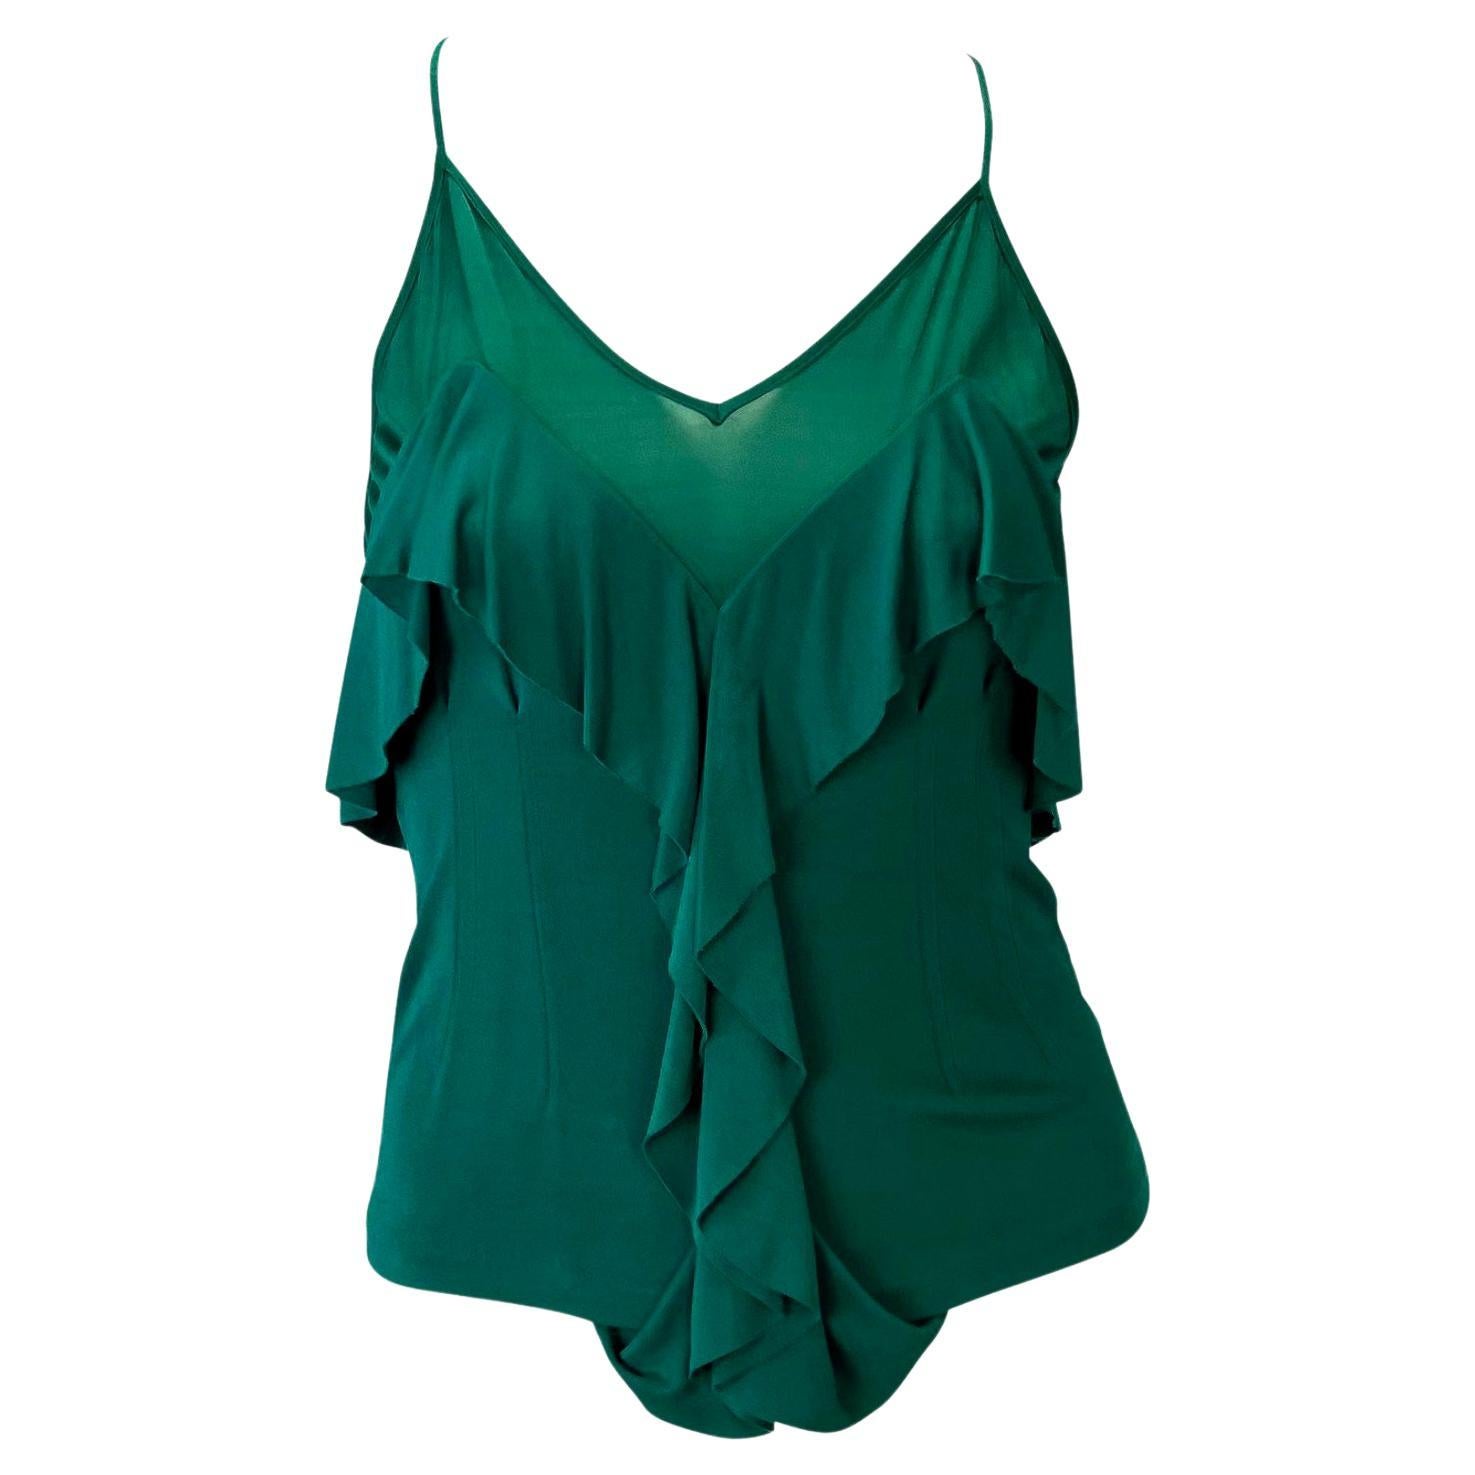 F/W 2003 Yves Saint Laurent by Tom Ford Teal Green Sheer Ruffle Tank Top